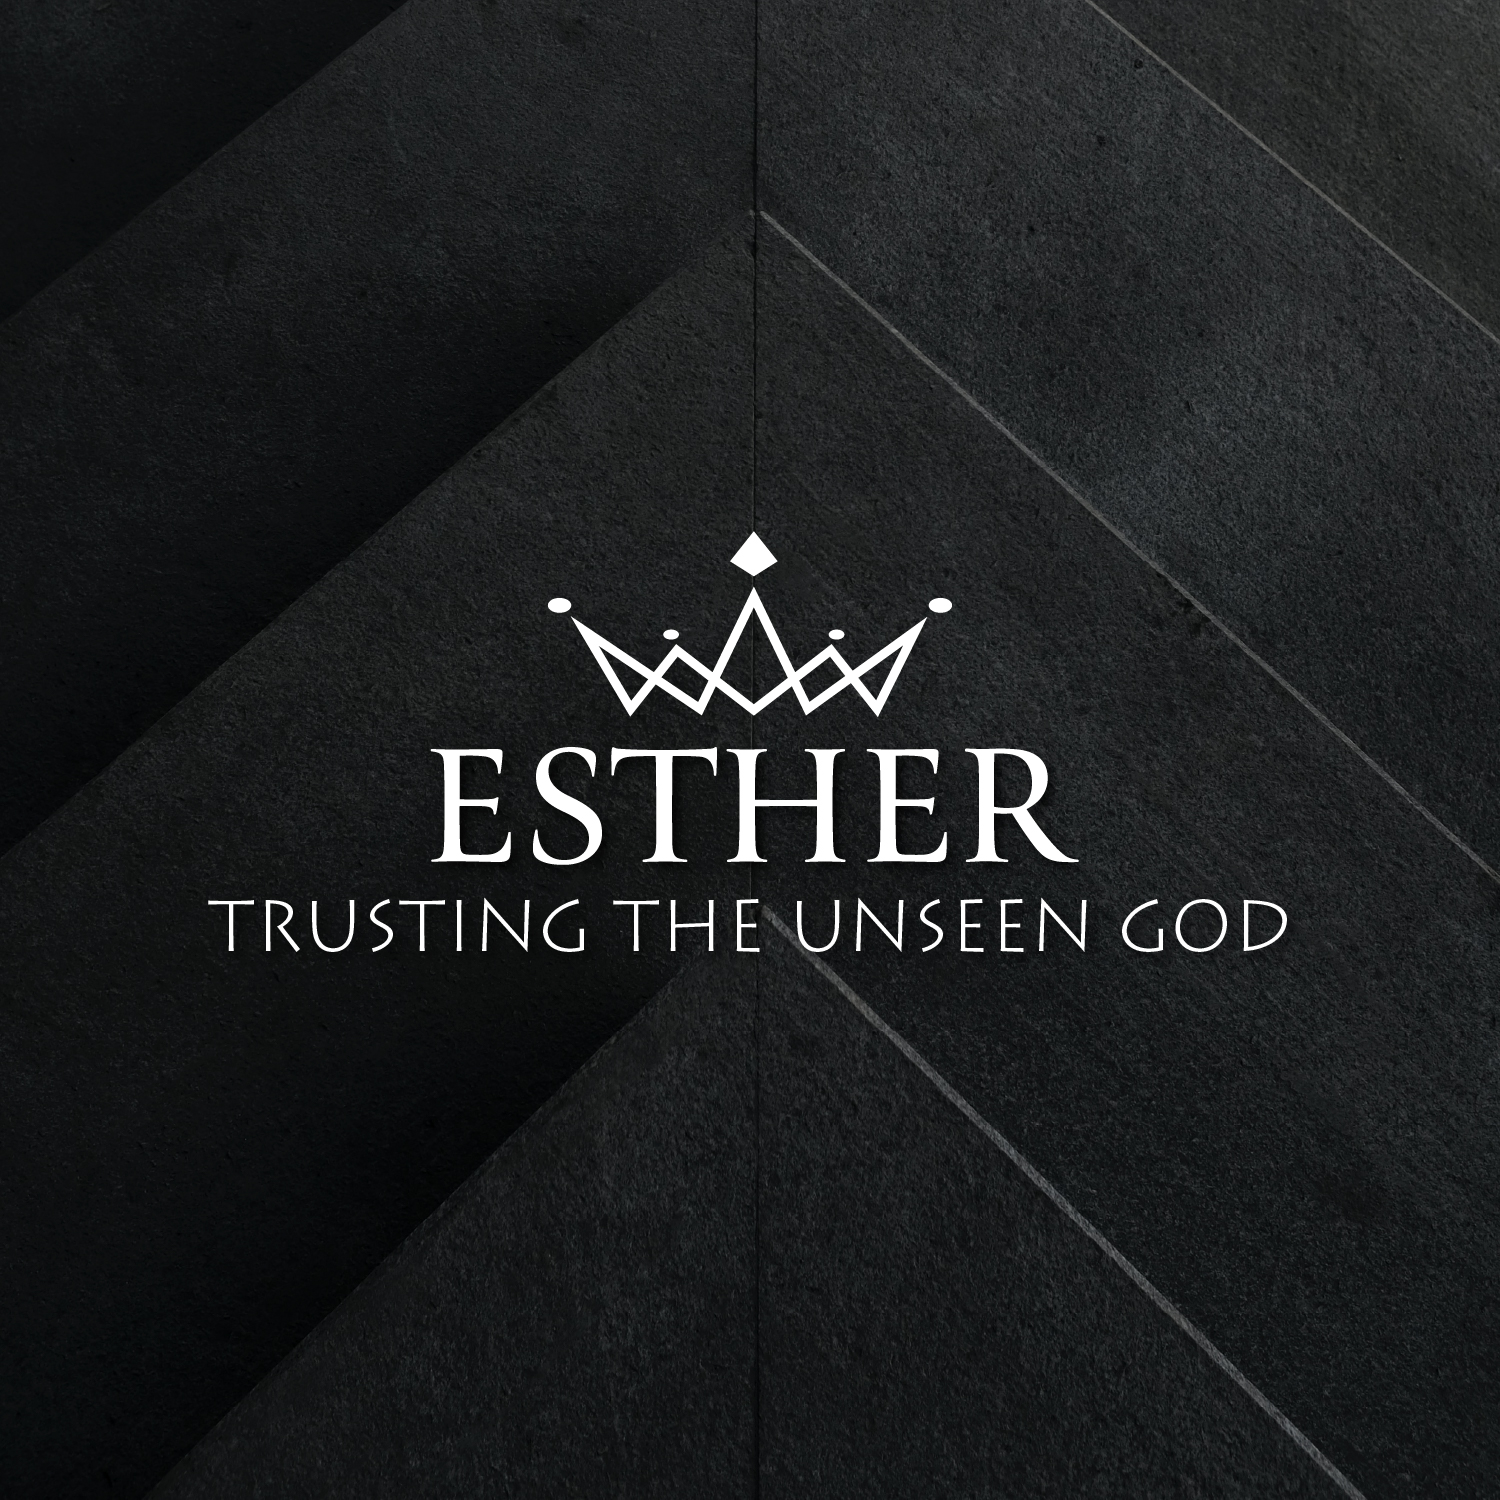 Esther 9:1-10:3: Remembering God’s Provision (2-26-2022)